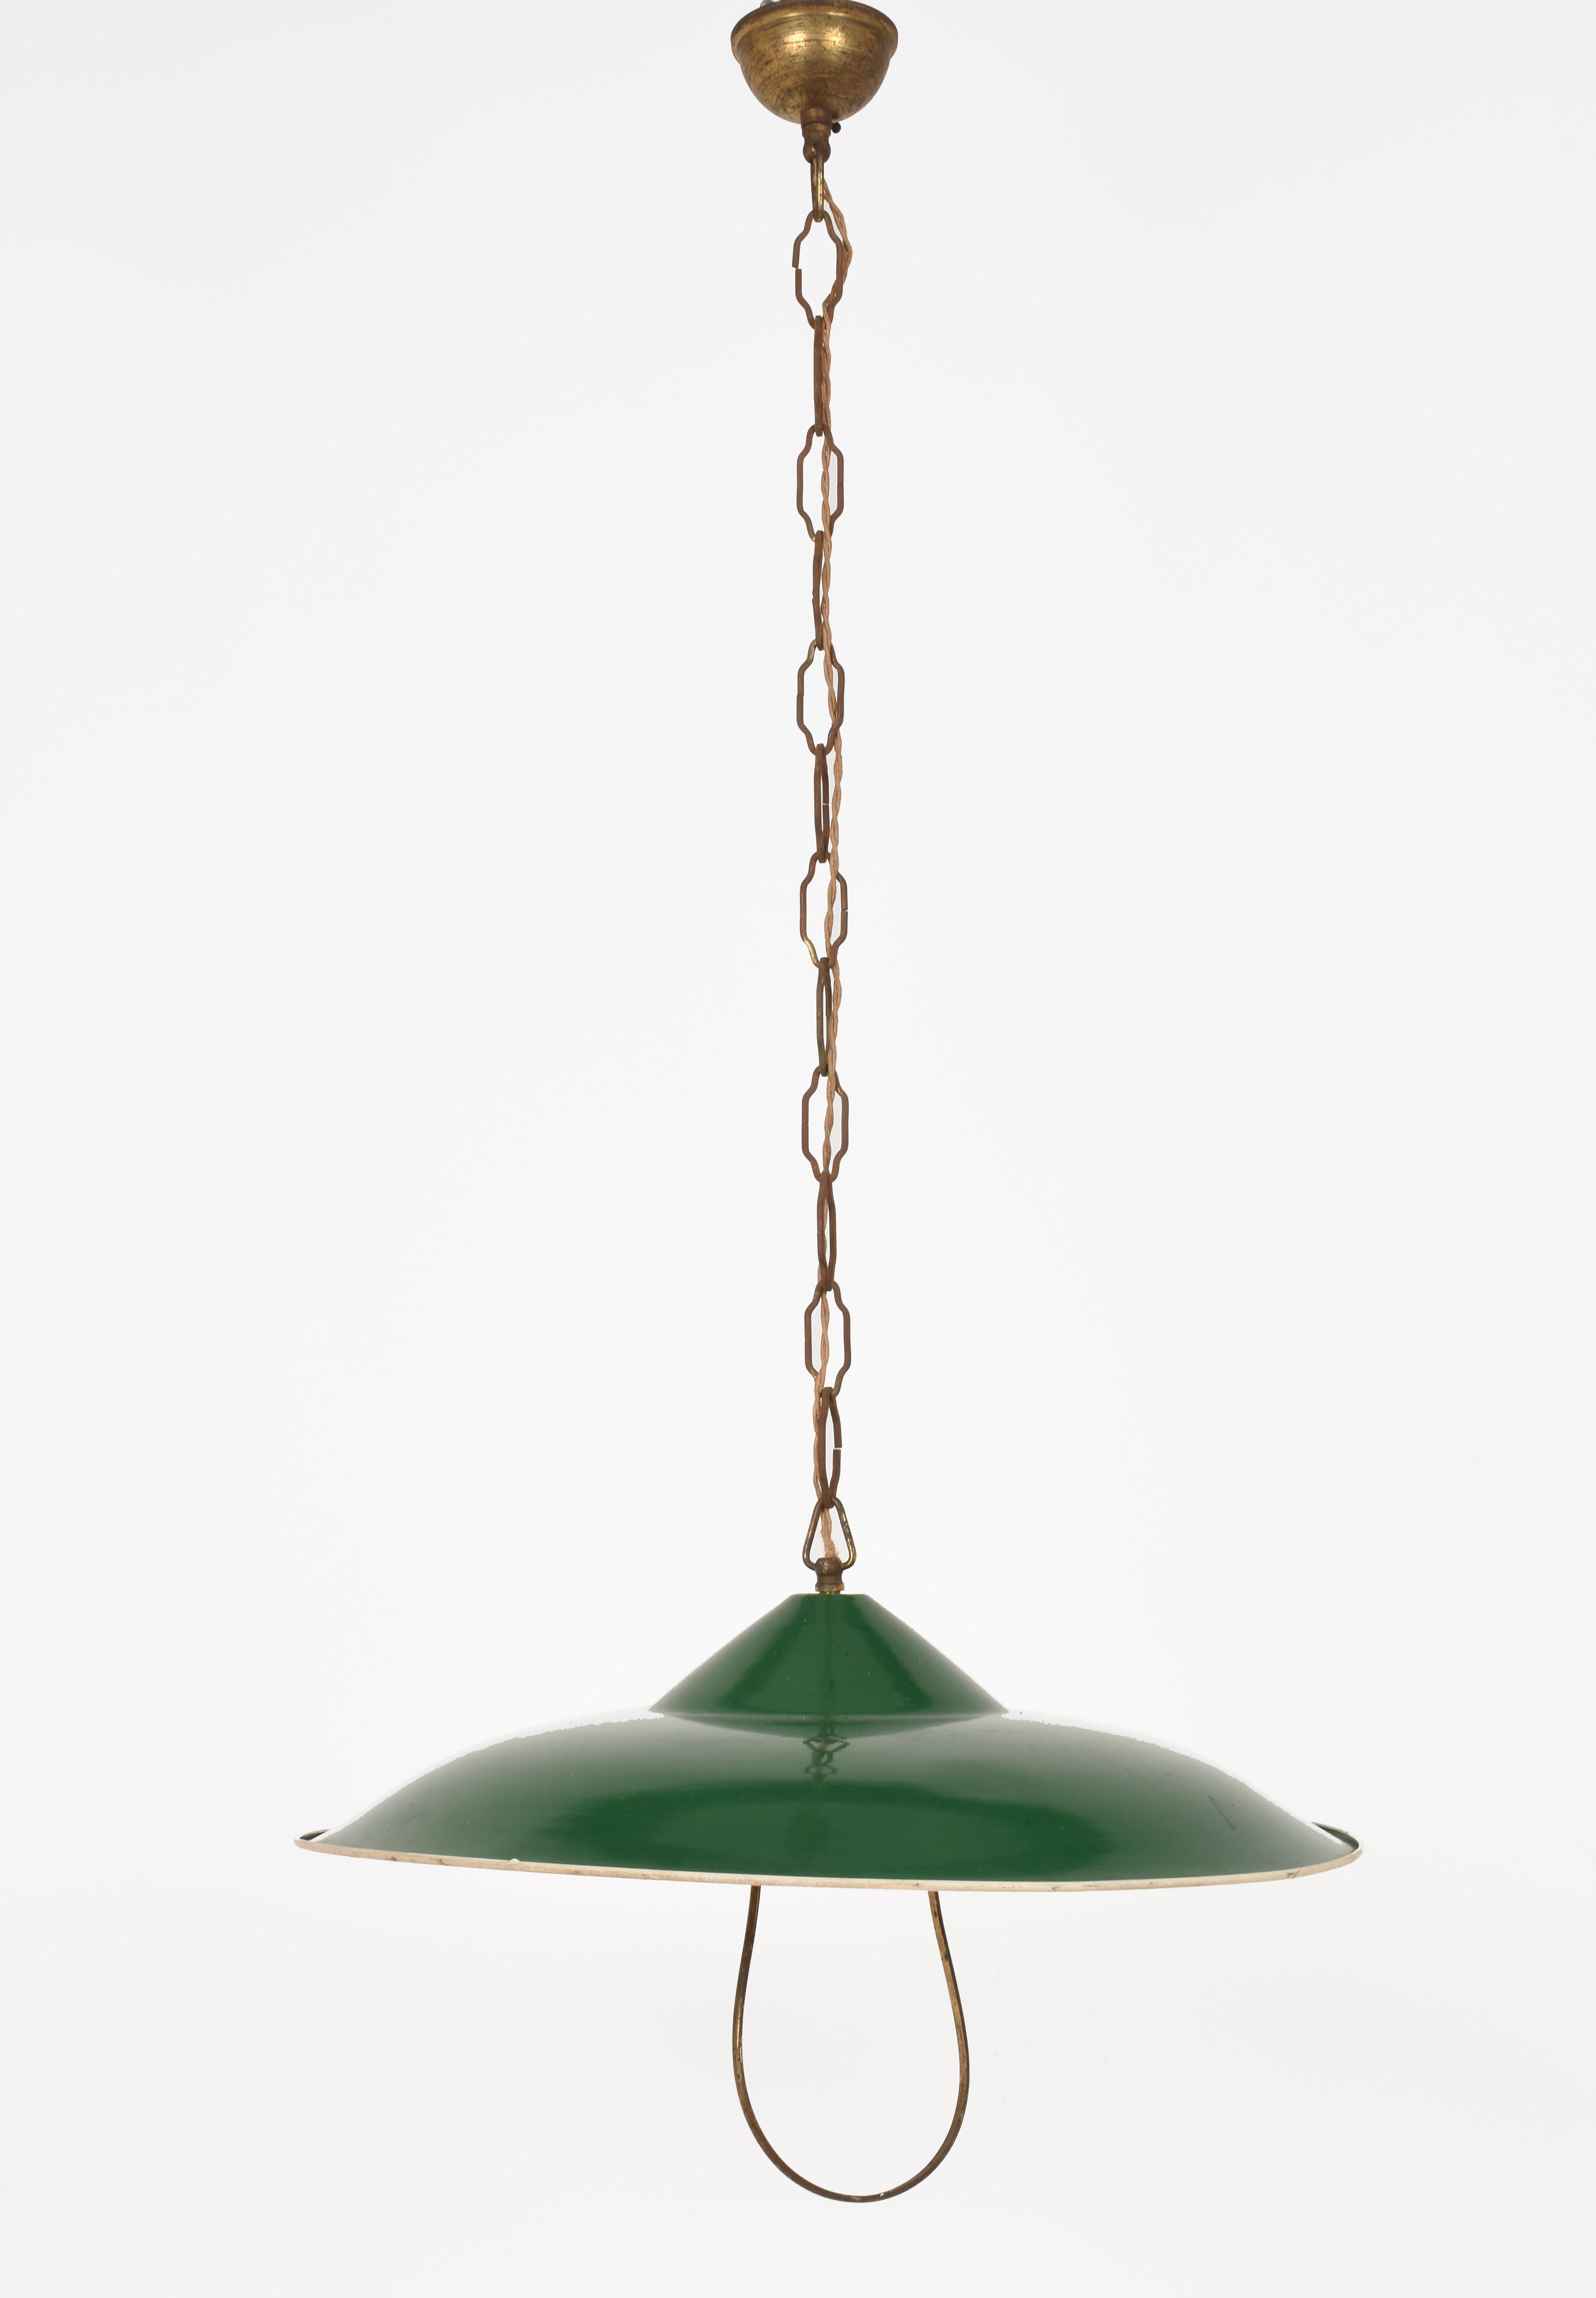 Mid-Century Modern Chandelier in Green Glazed Metal Pendant Italy, Industrial Style of the 1950s For Sale